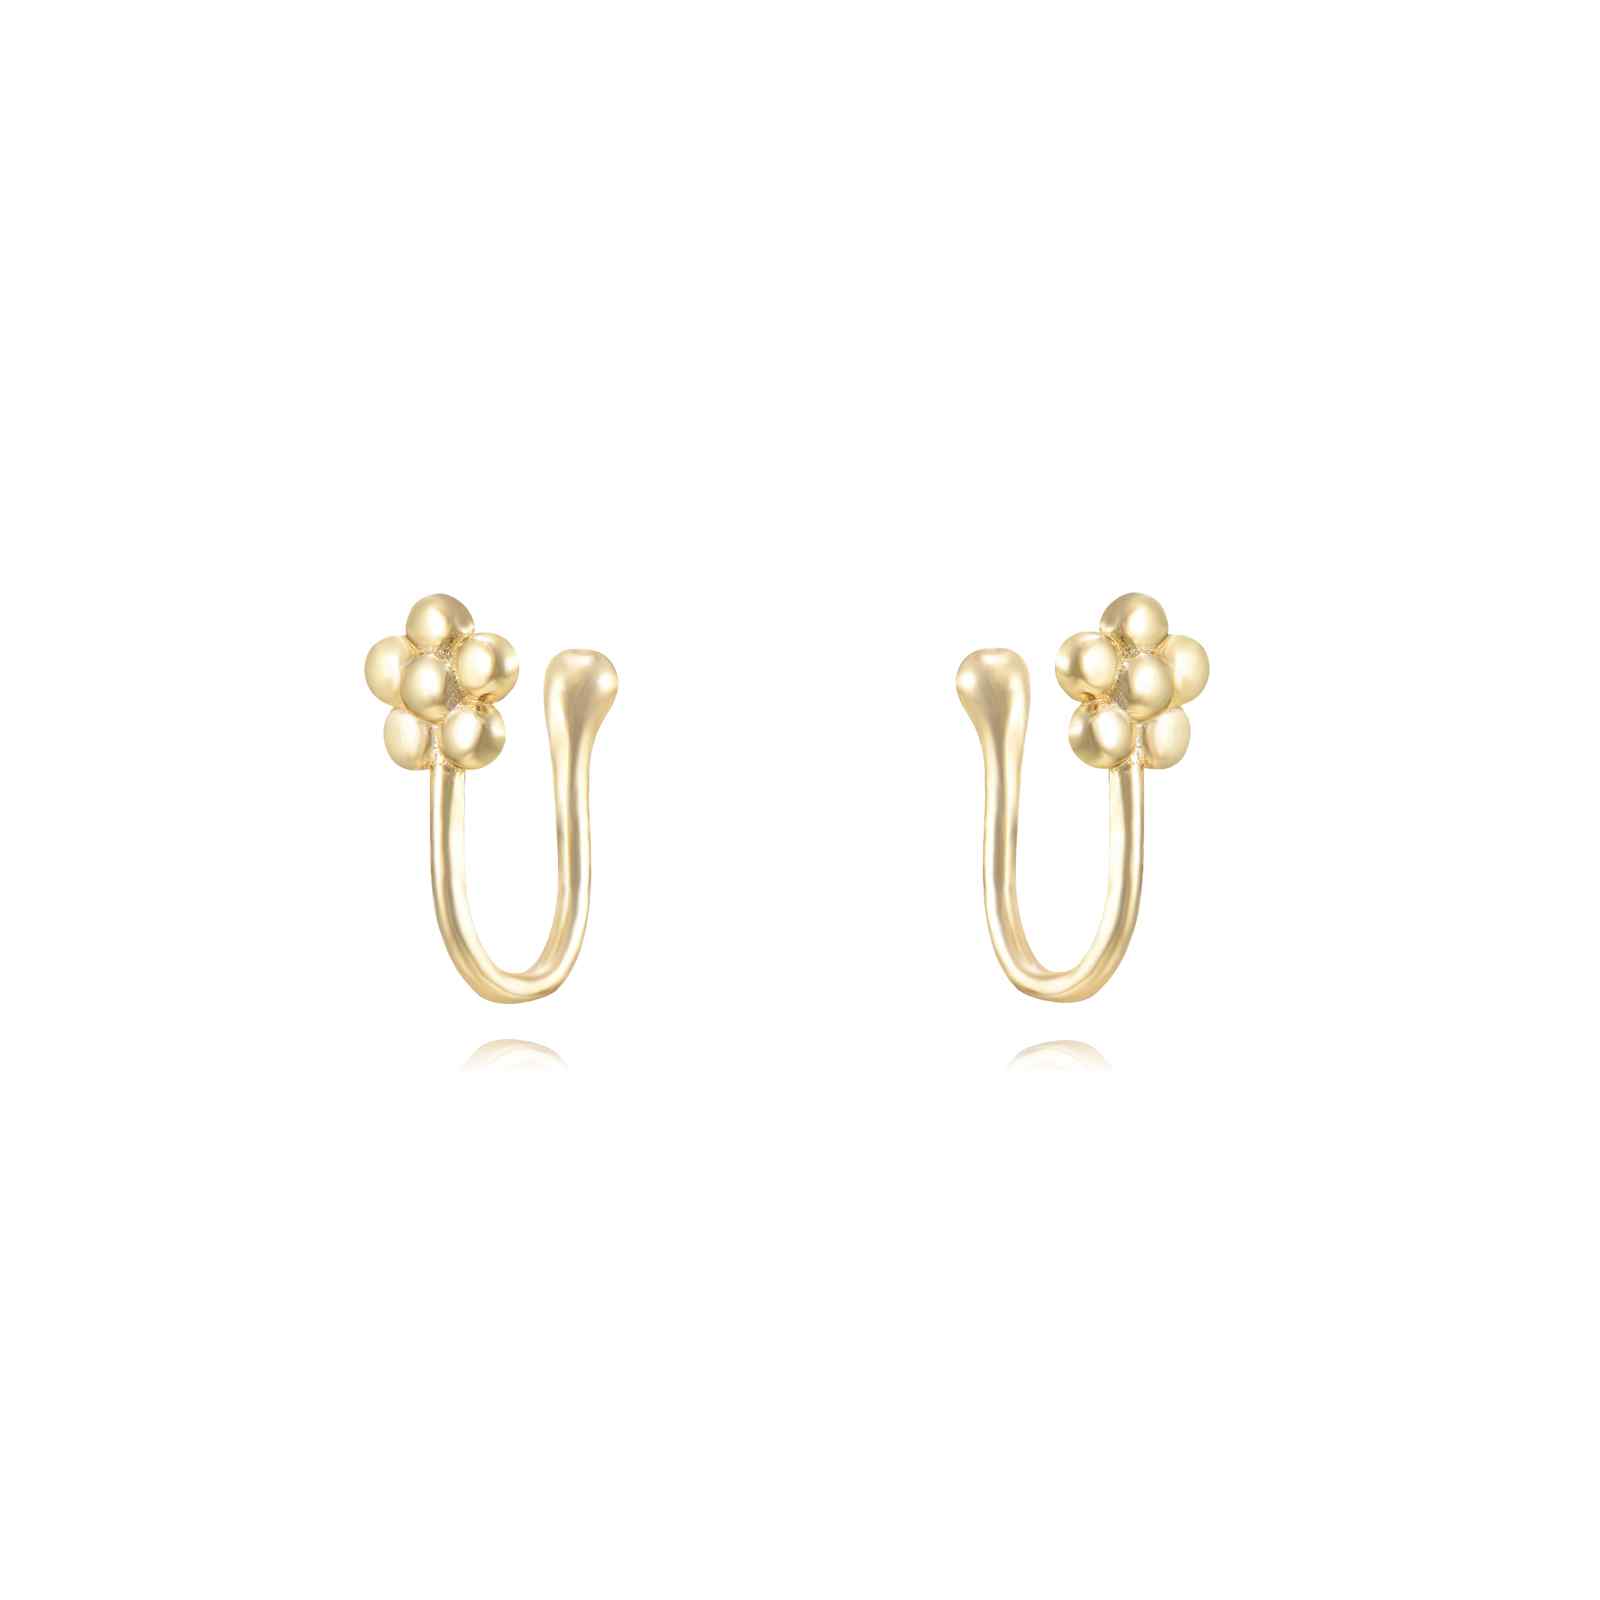 Silver Earrings Earcuff Earrings -  Flower - 12,5*5,5mm - Gold Plated Silver and Rhodium Silver